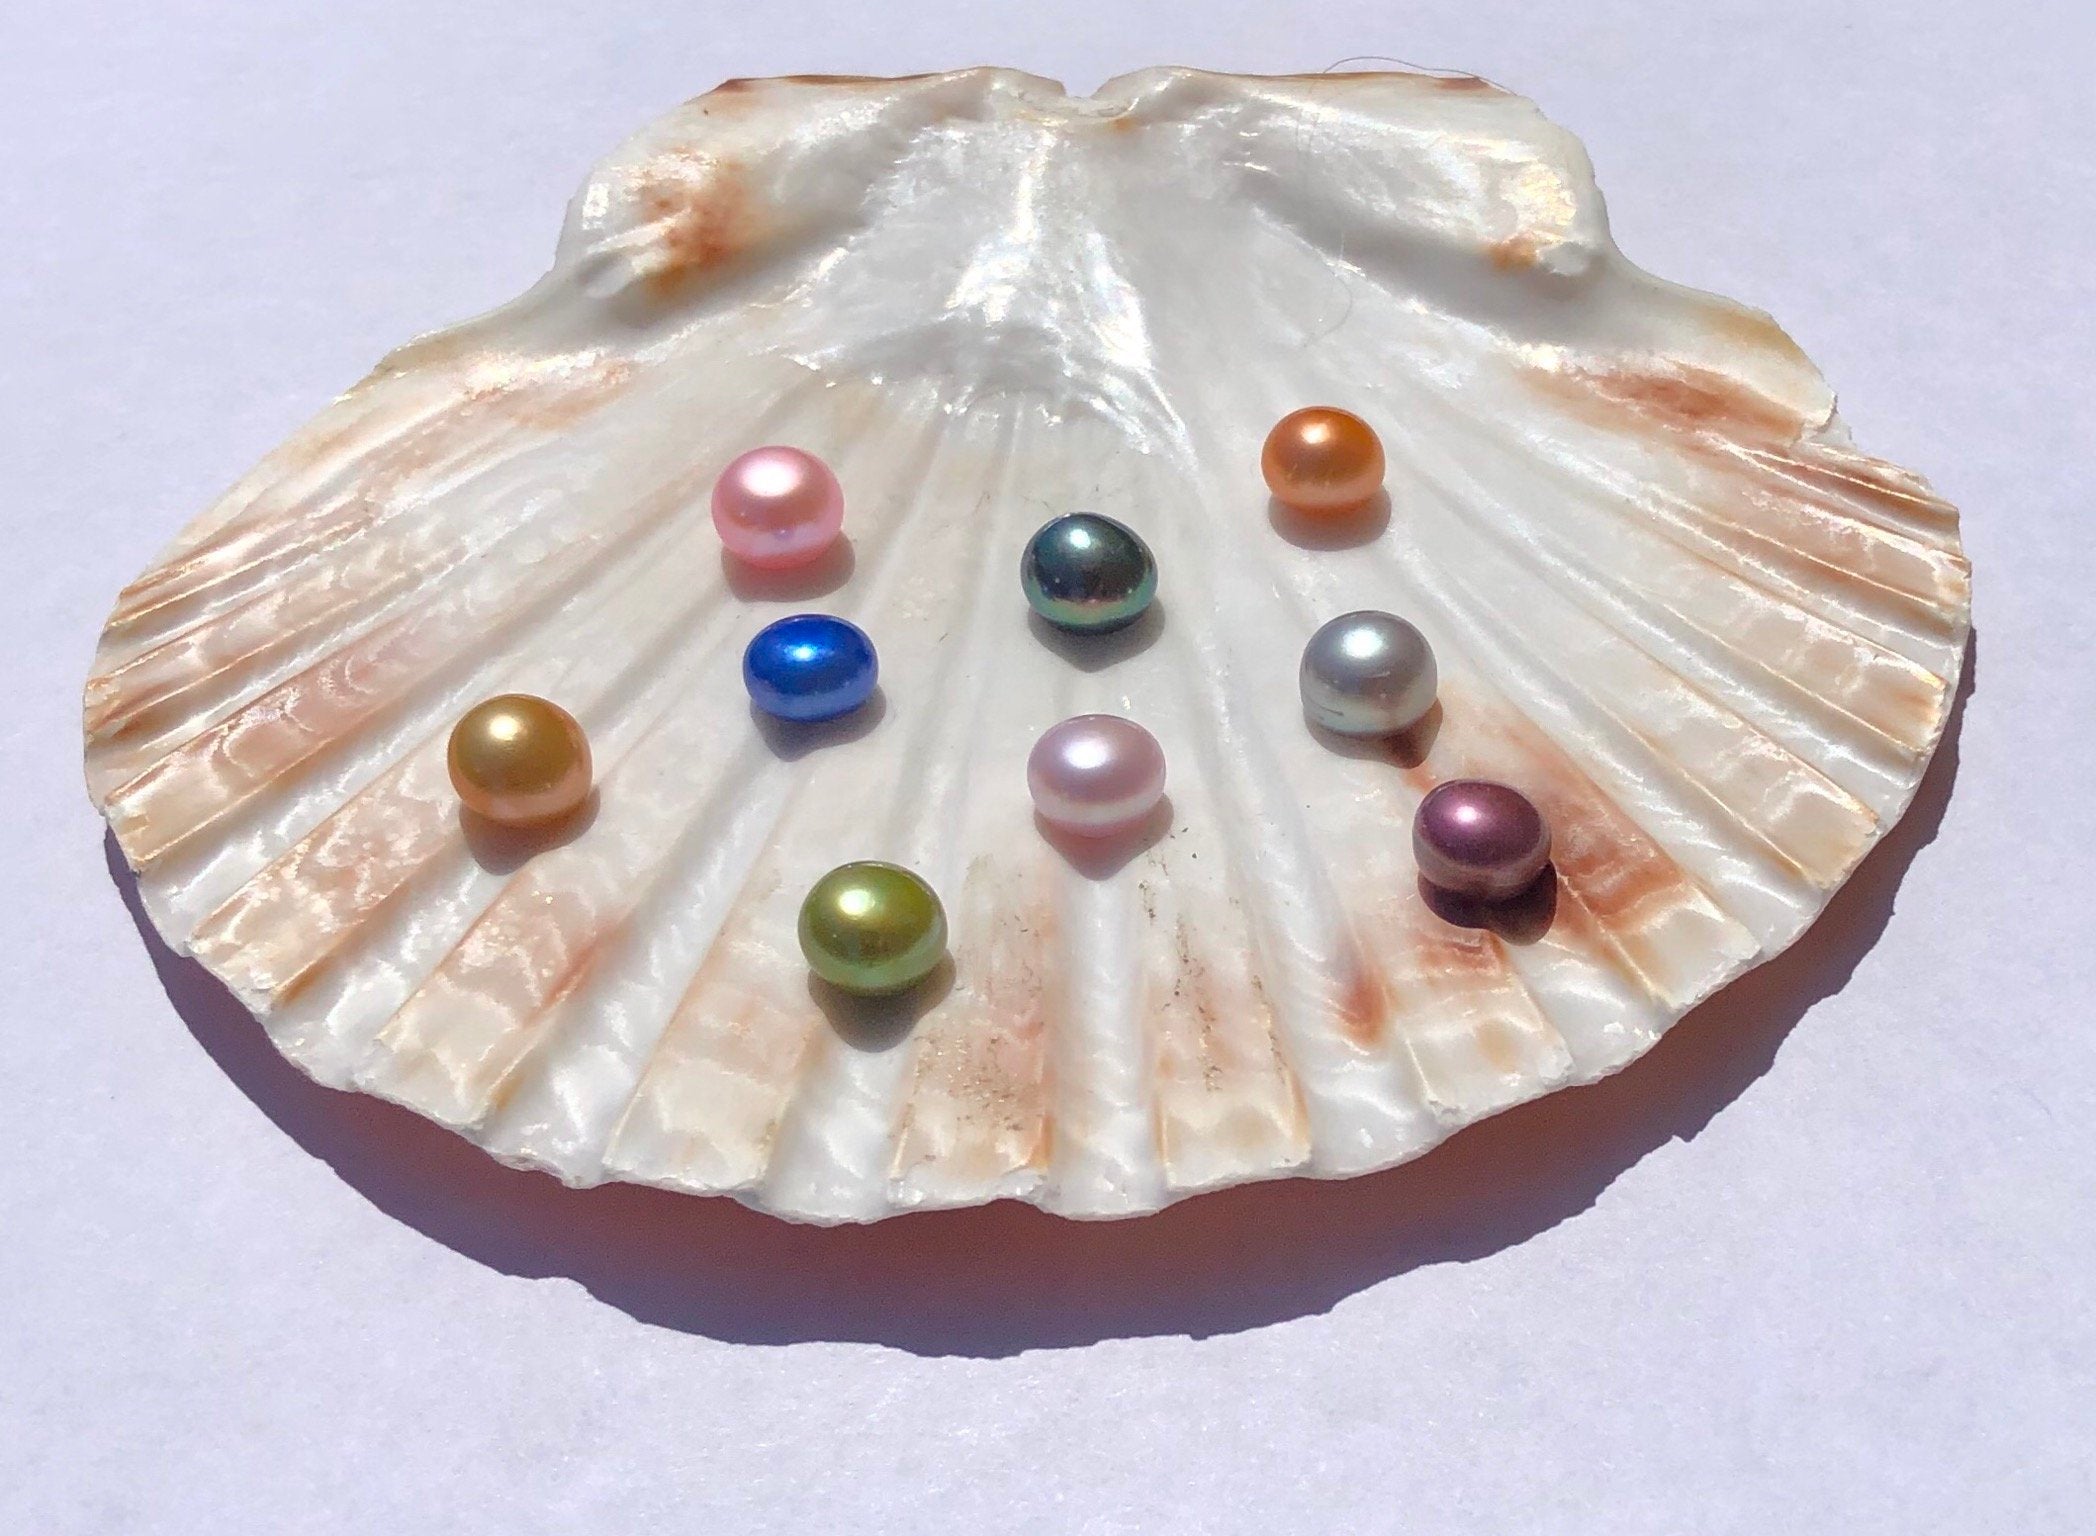 LOOSE PEARL - Pre Drilled Button Shaped Flat Bottom Pearls 6-10mm